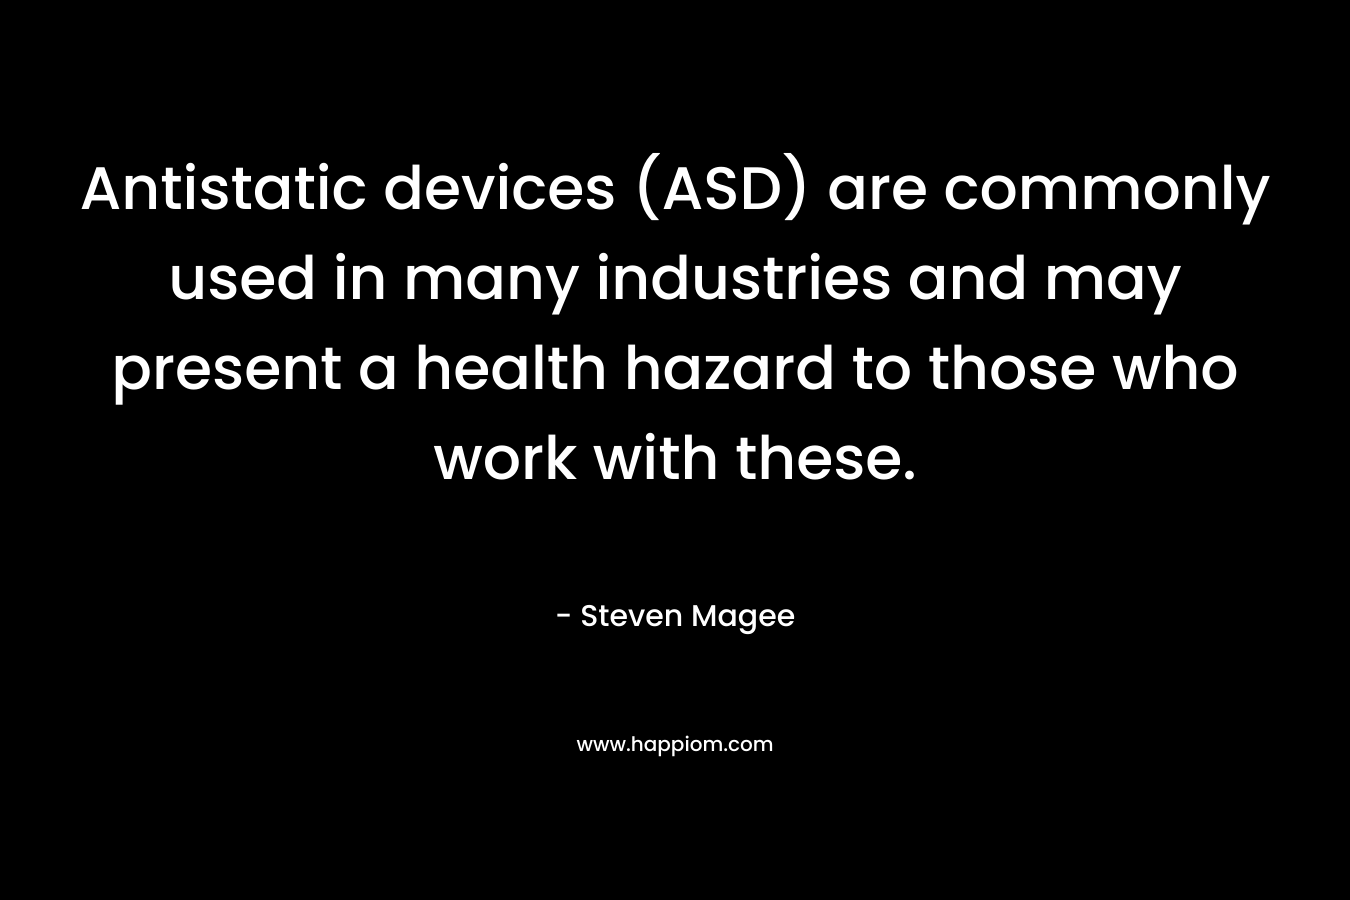 Antistatic devices (ASD) are commonly used in many industries and may present a health hazard to those who work with these. – Steven Magee